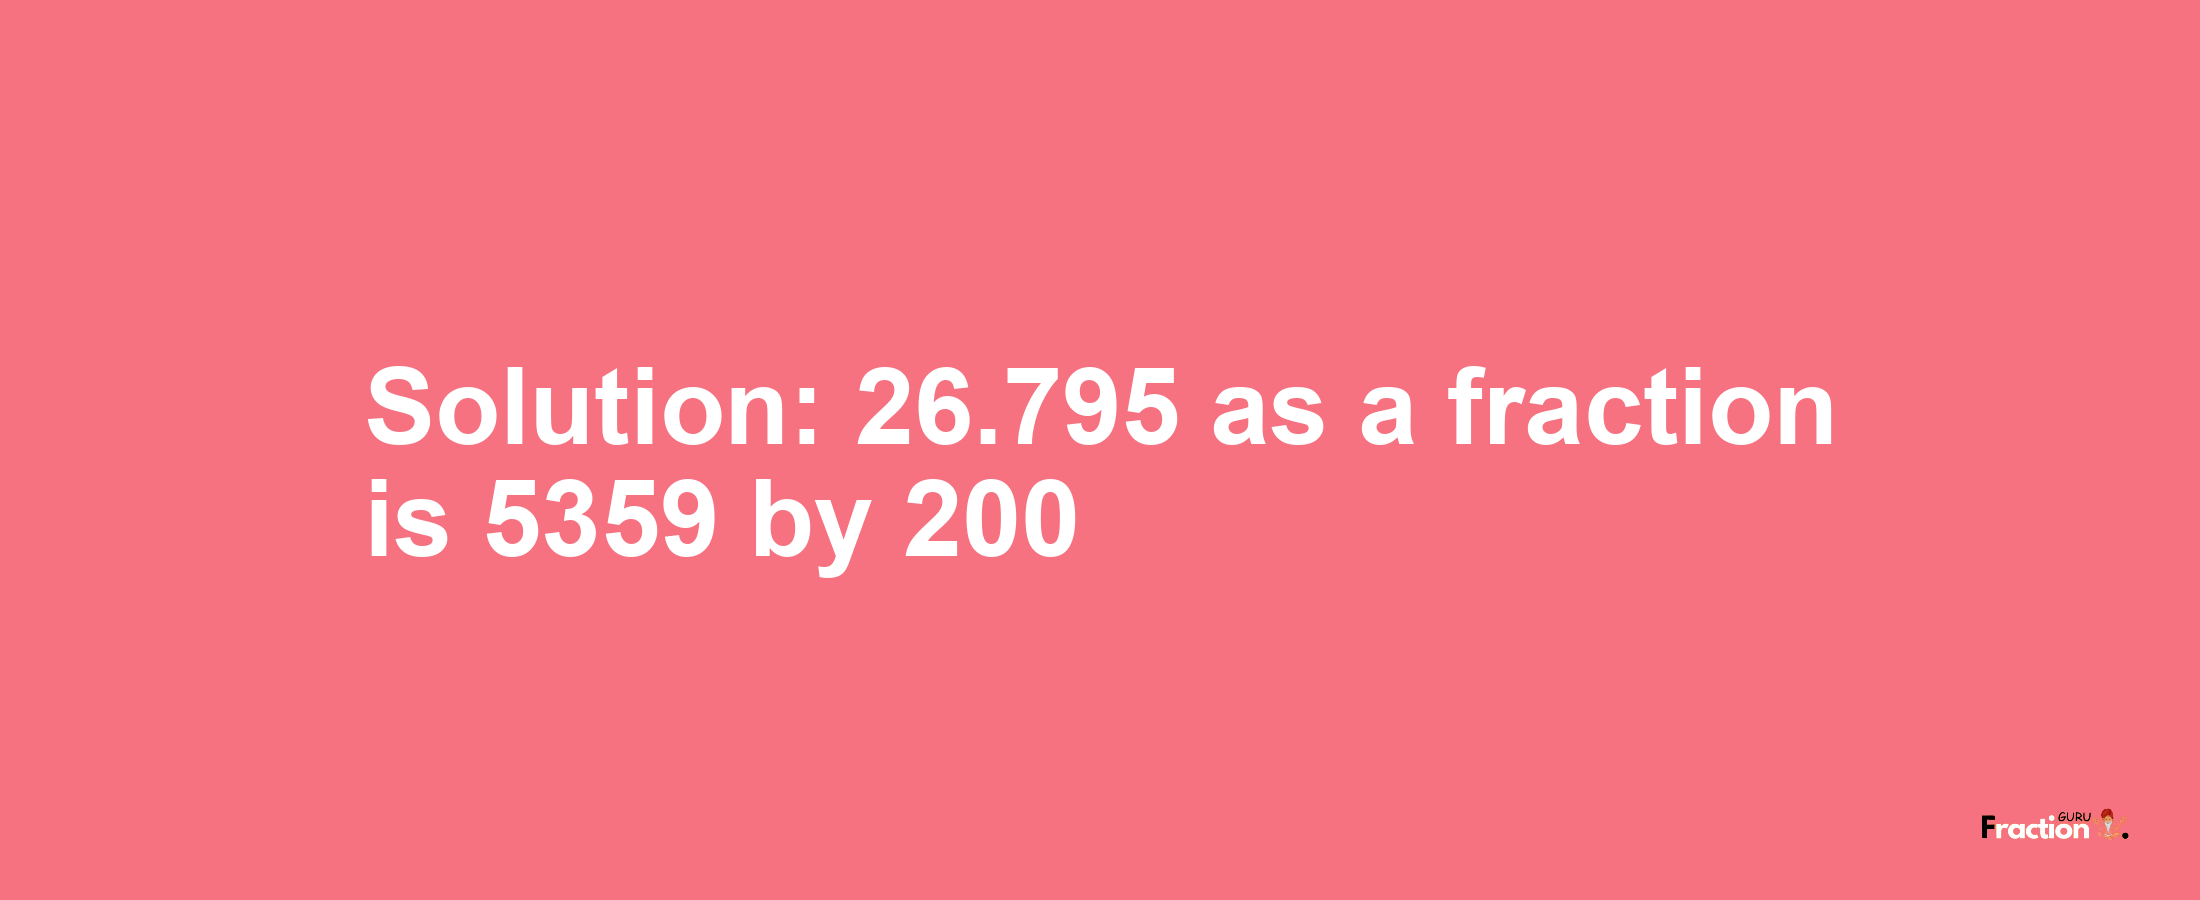 Solution:26.795 as a fraction is 5359/200